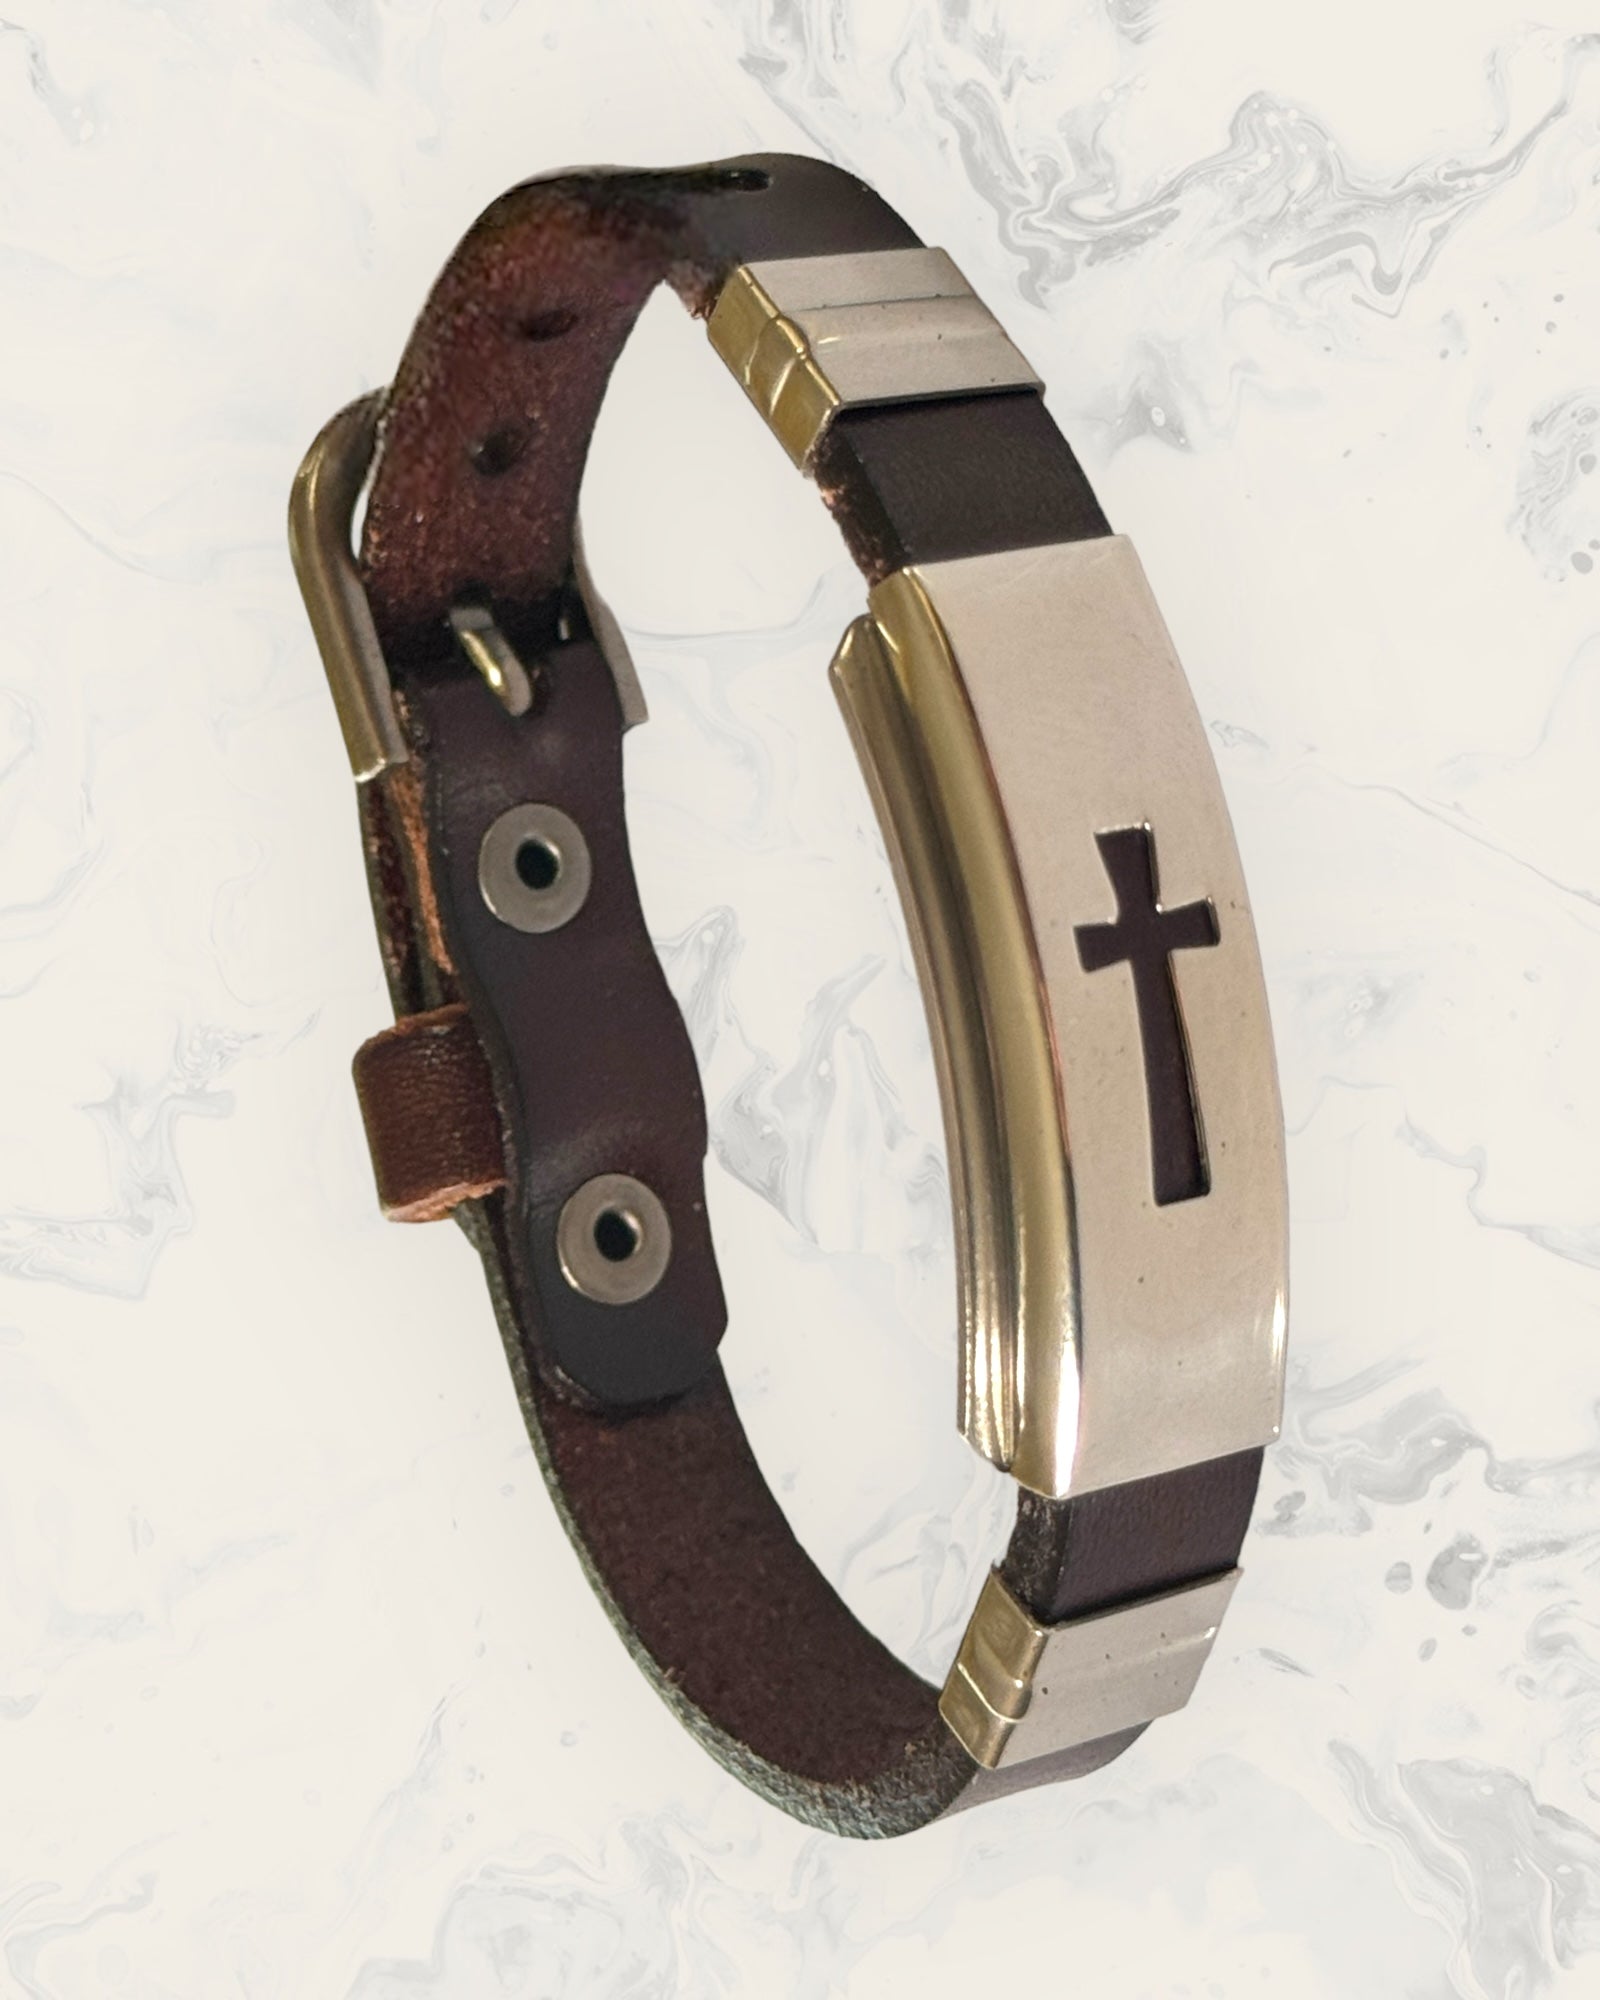 Natural Pain Relief and EMF Protection Bracelet Leather Band Color Dark Brown with Cross design on a silver metal slider